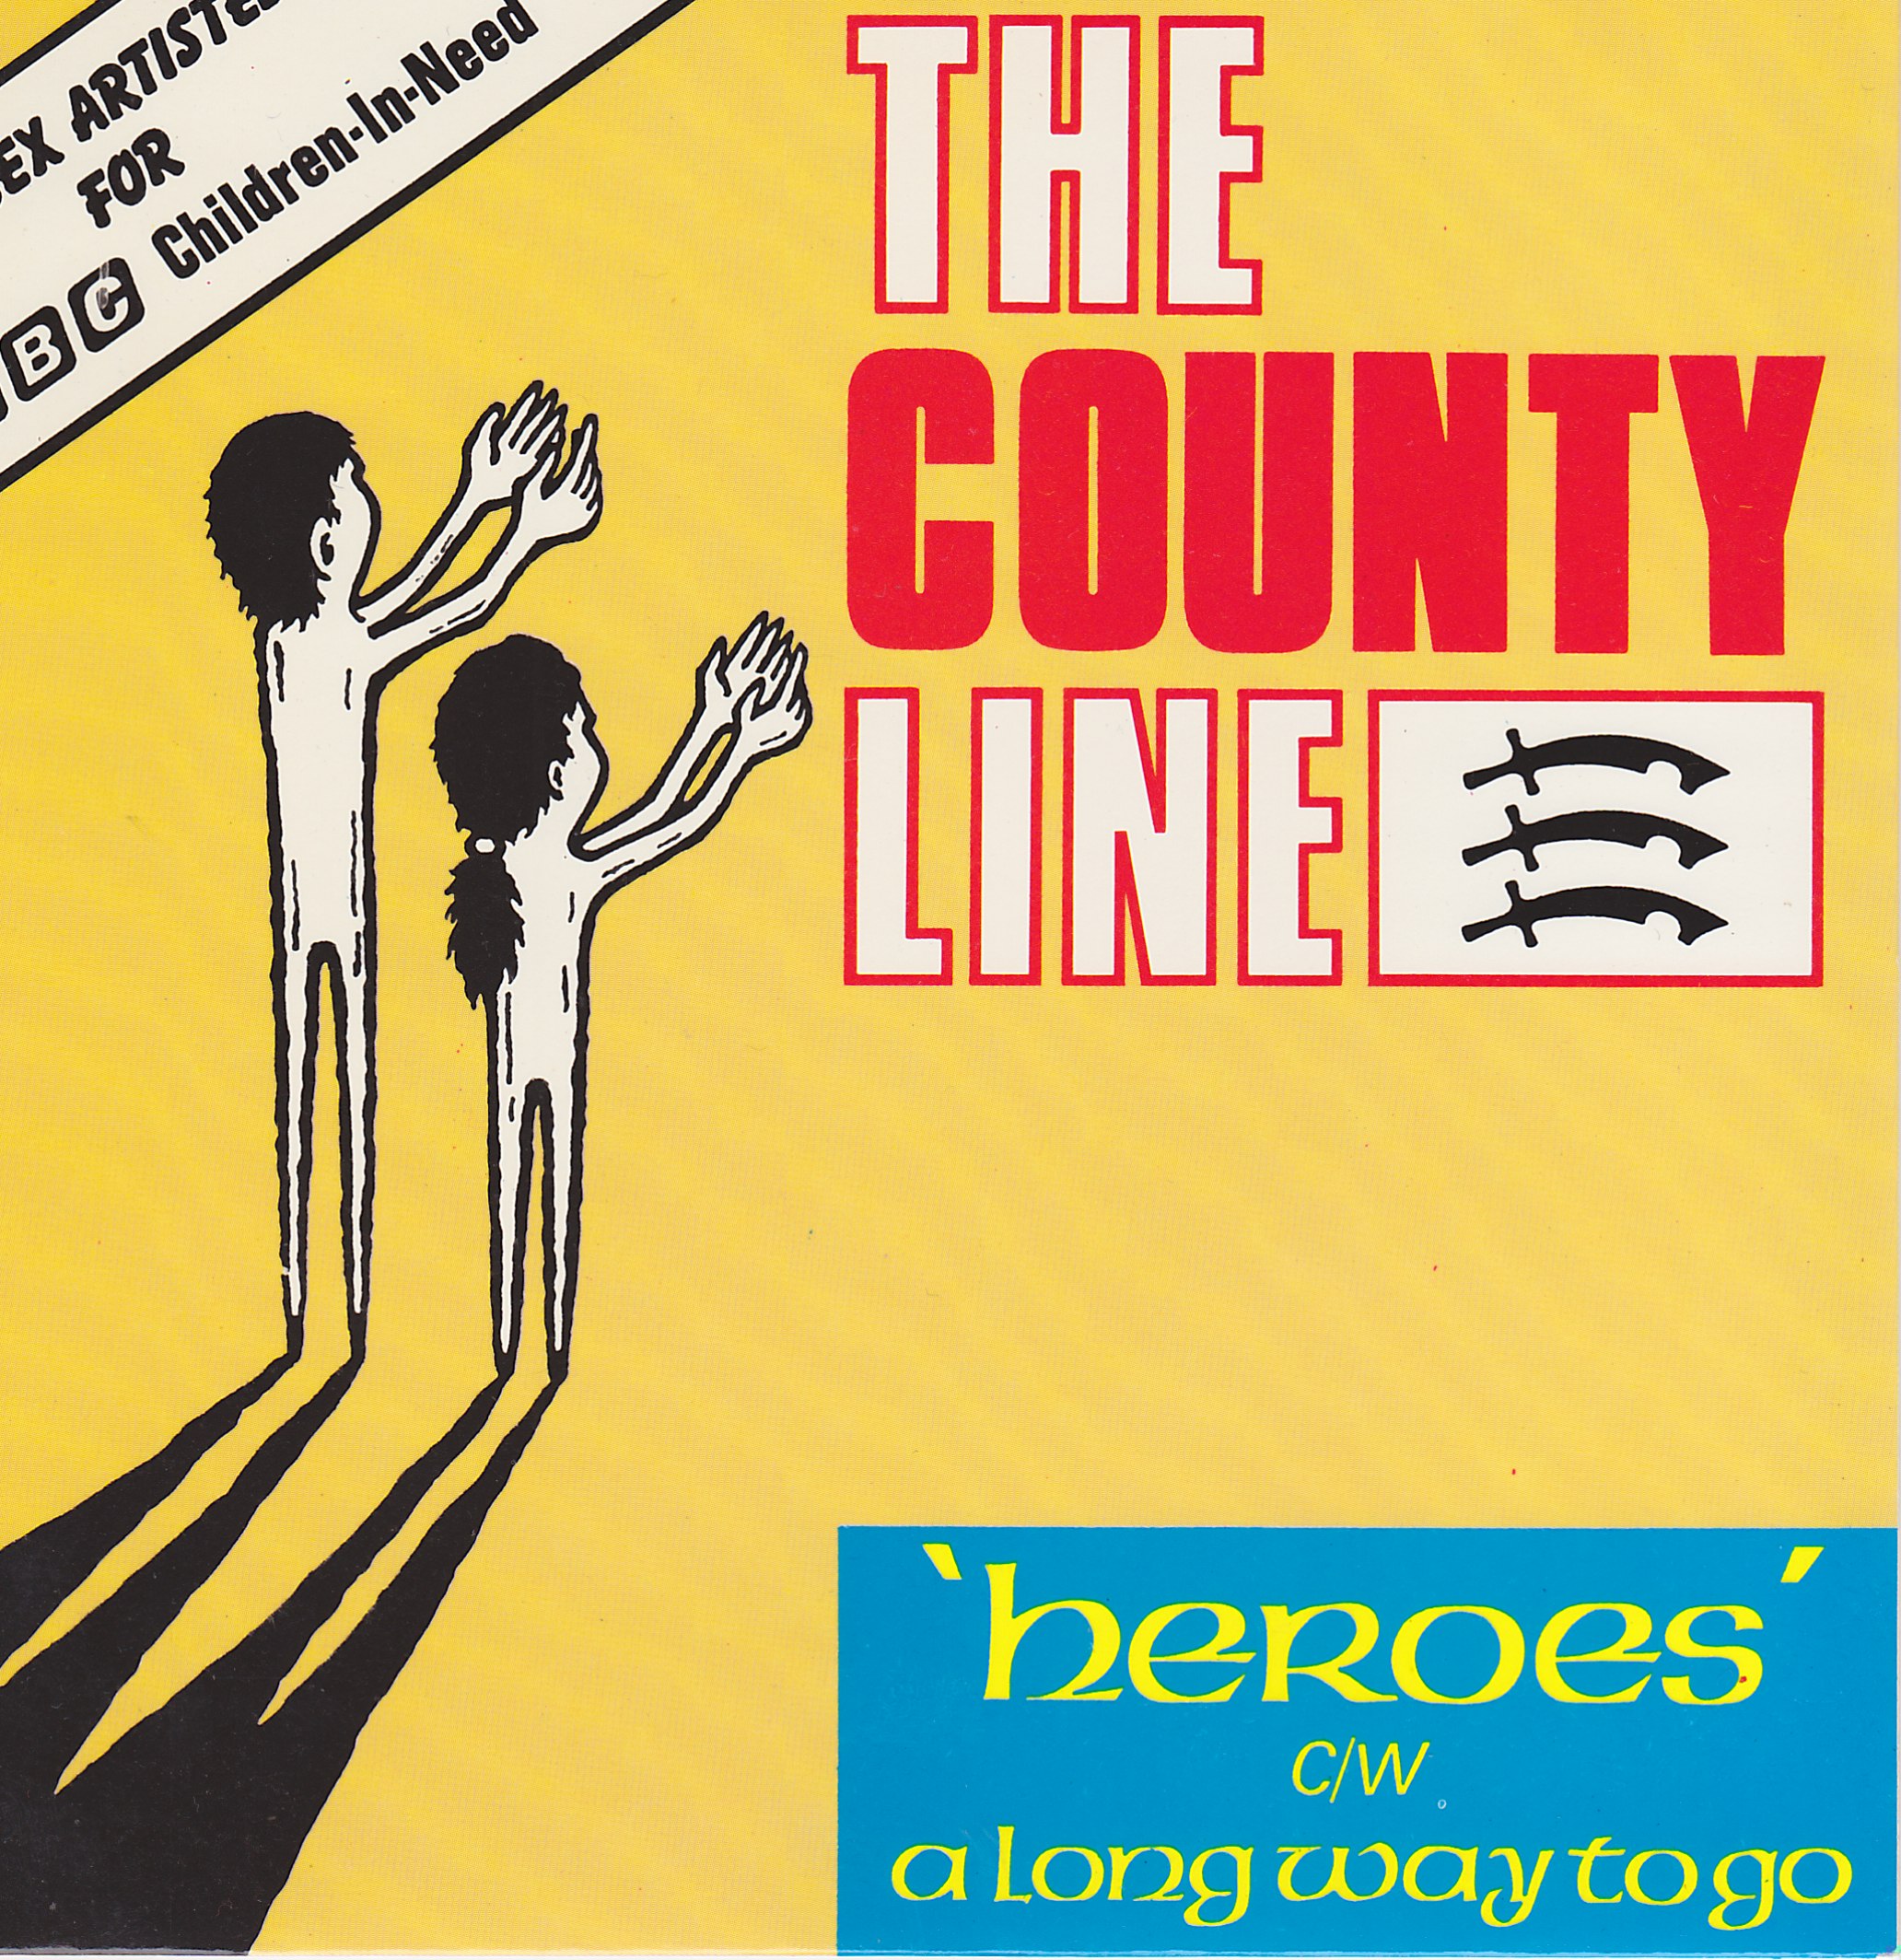 Picture of Heroes by artist The Country Line from the BBC singles - Records and Tapes library